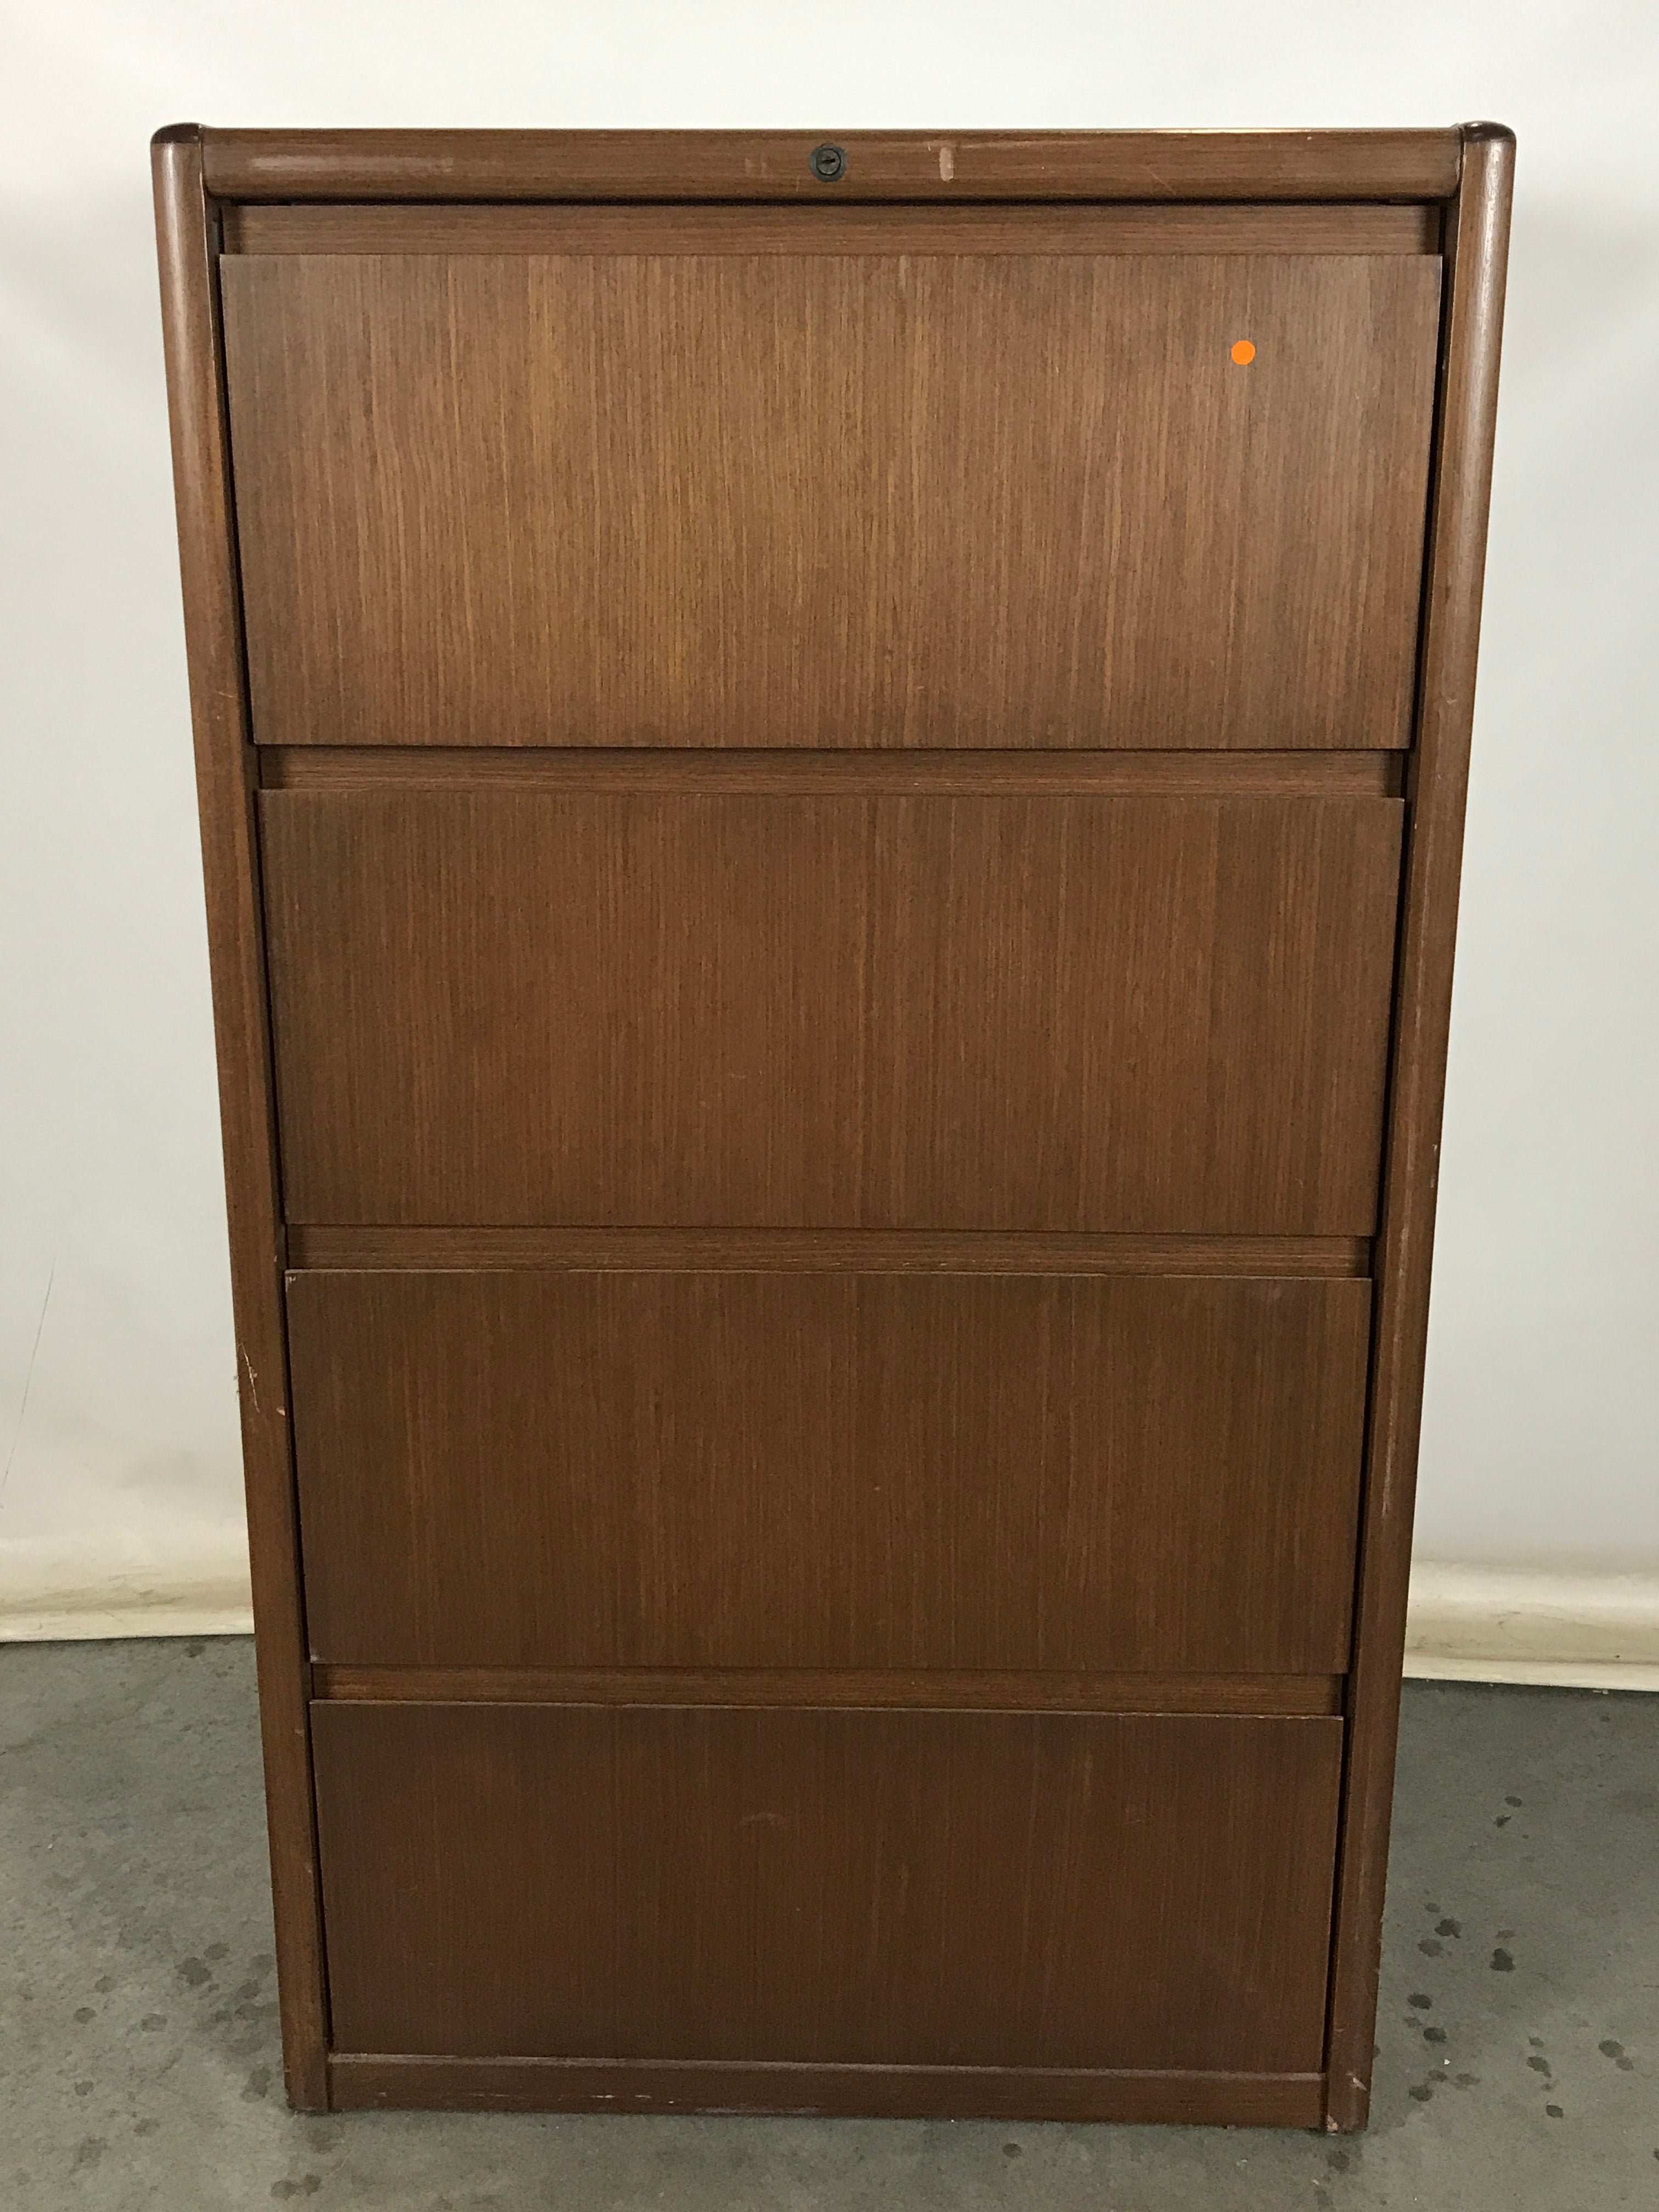 Steelcase 4 Drawer Wooden Lateral File Cabinet